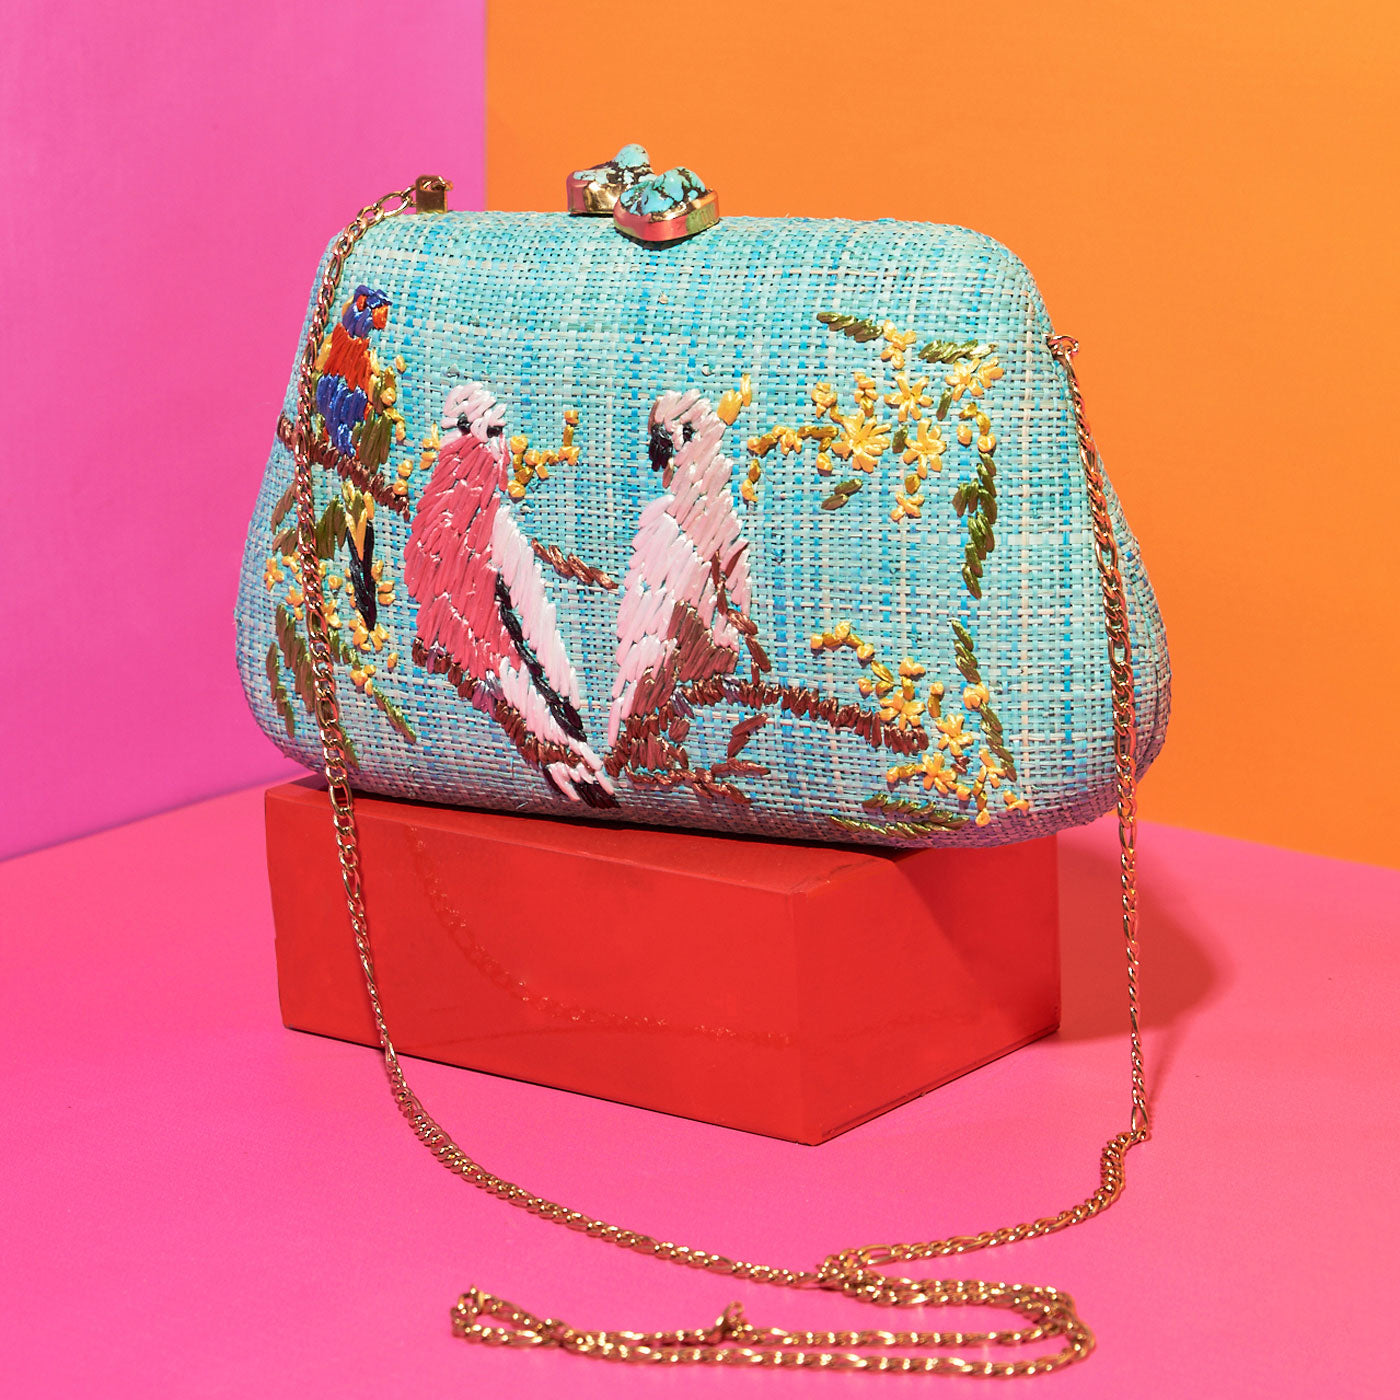 Quirky Wicker Bags for the Truly Ridiculous